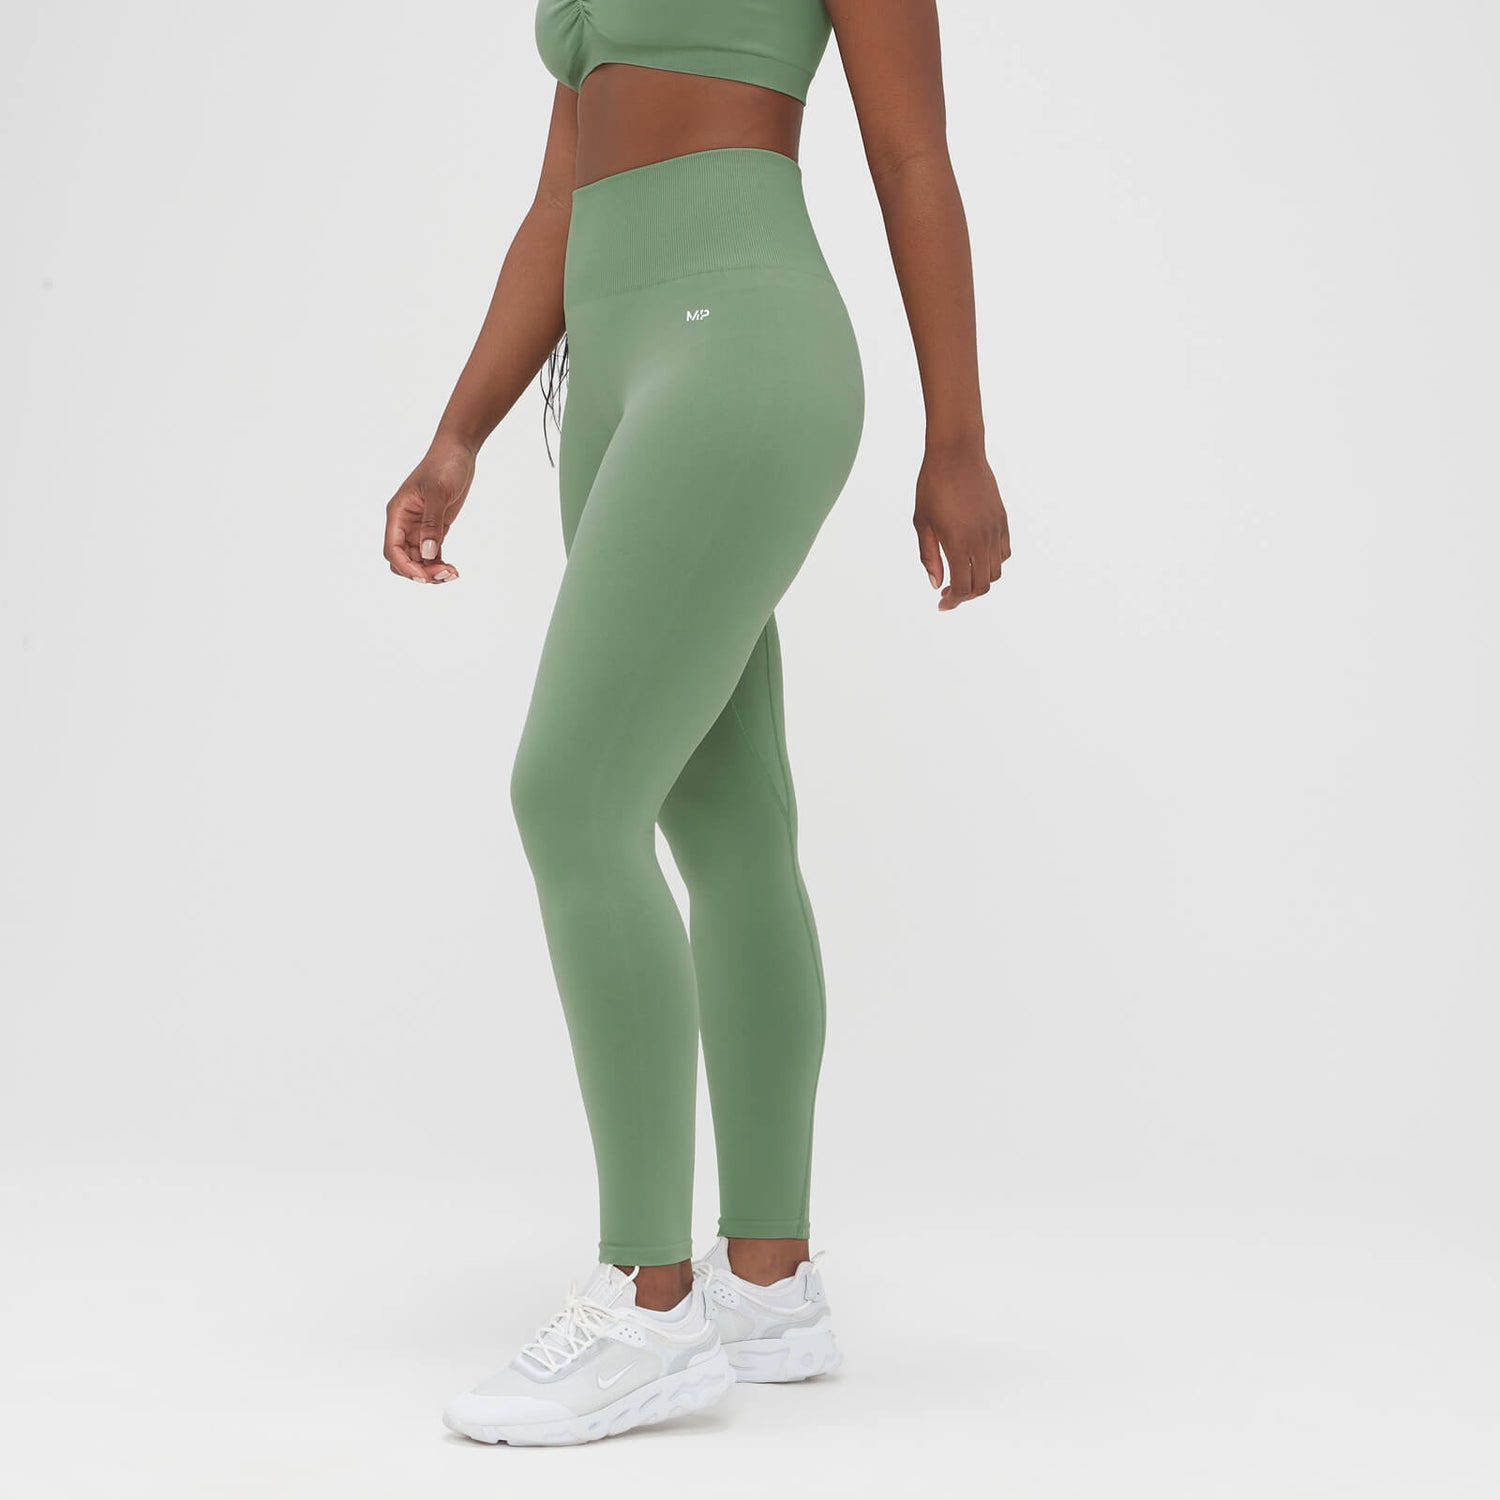 MP Women's Washed Seamless Leggings - Washed Jade